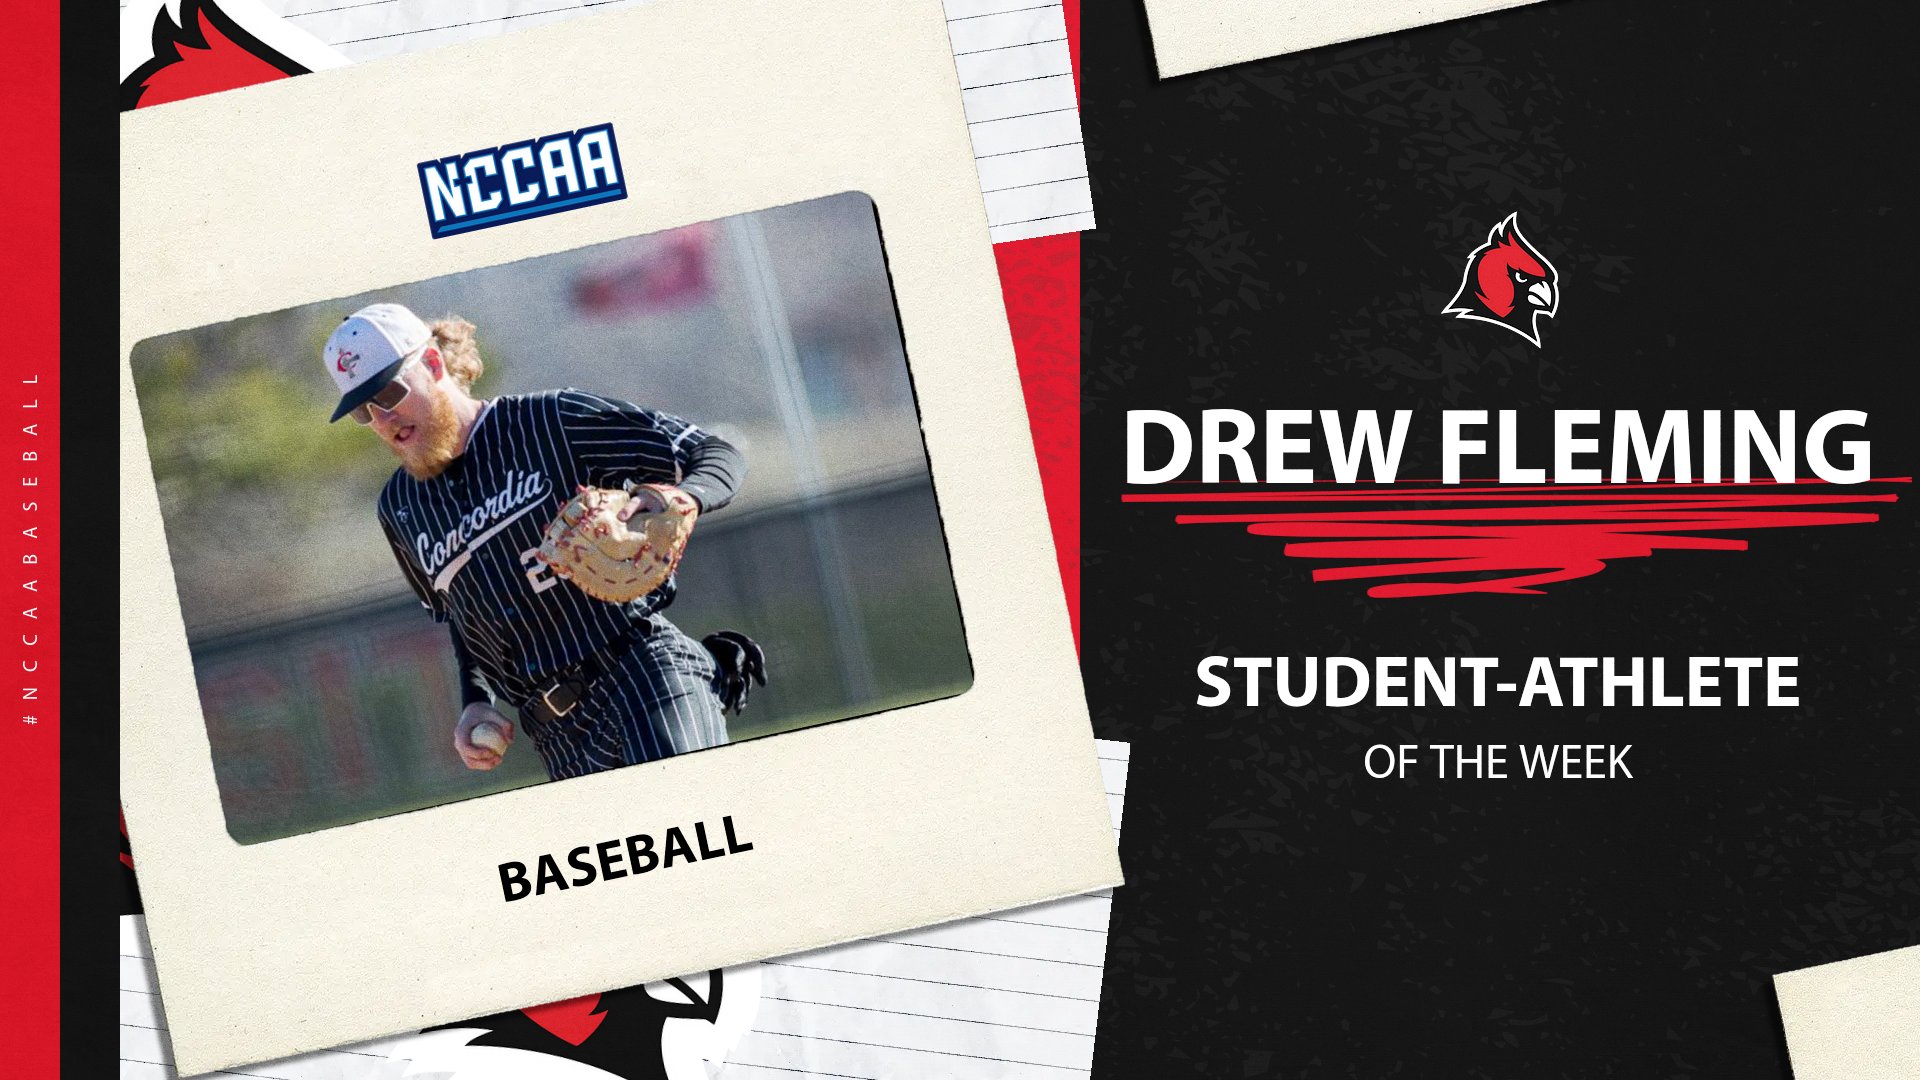 Drew Fleming dubbed NCCAA Student-Athlete of the Week